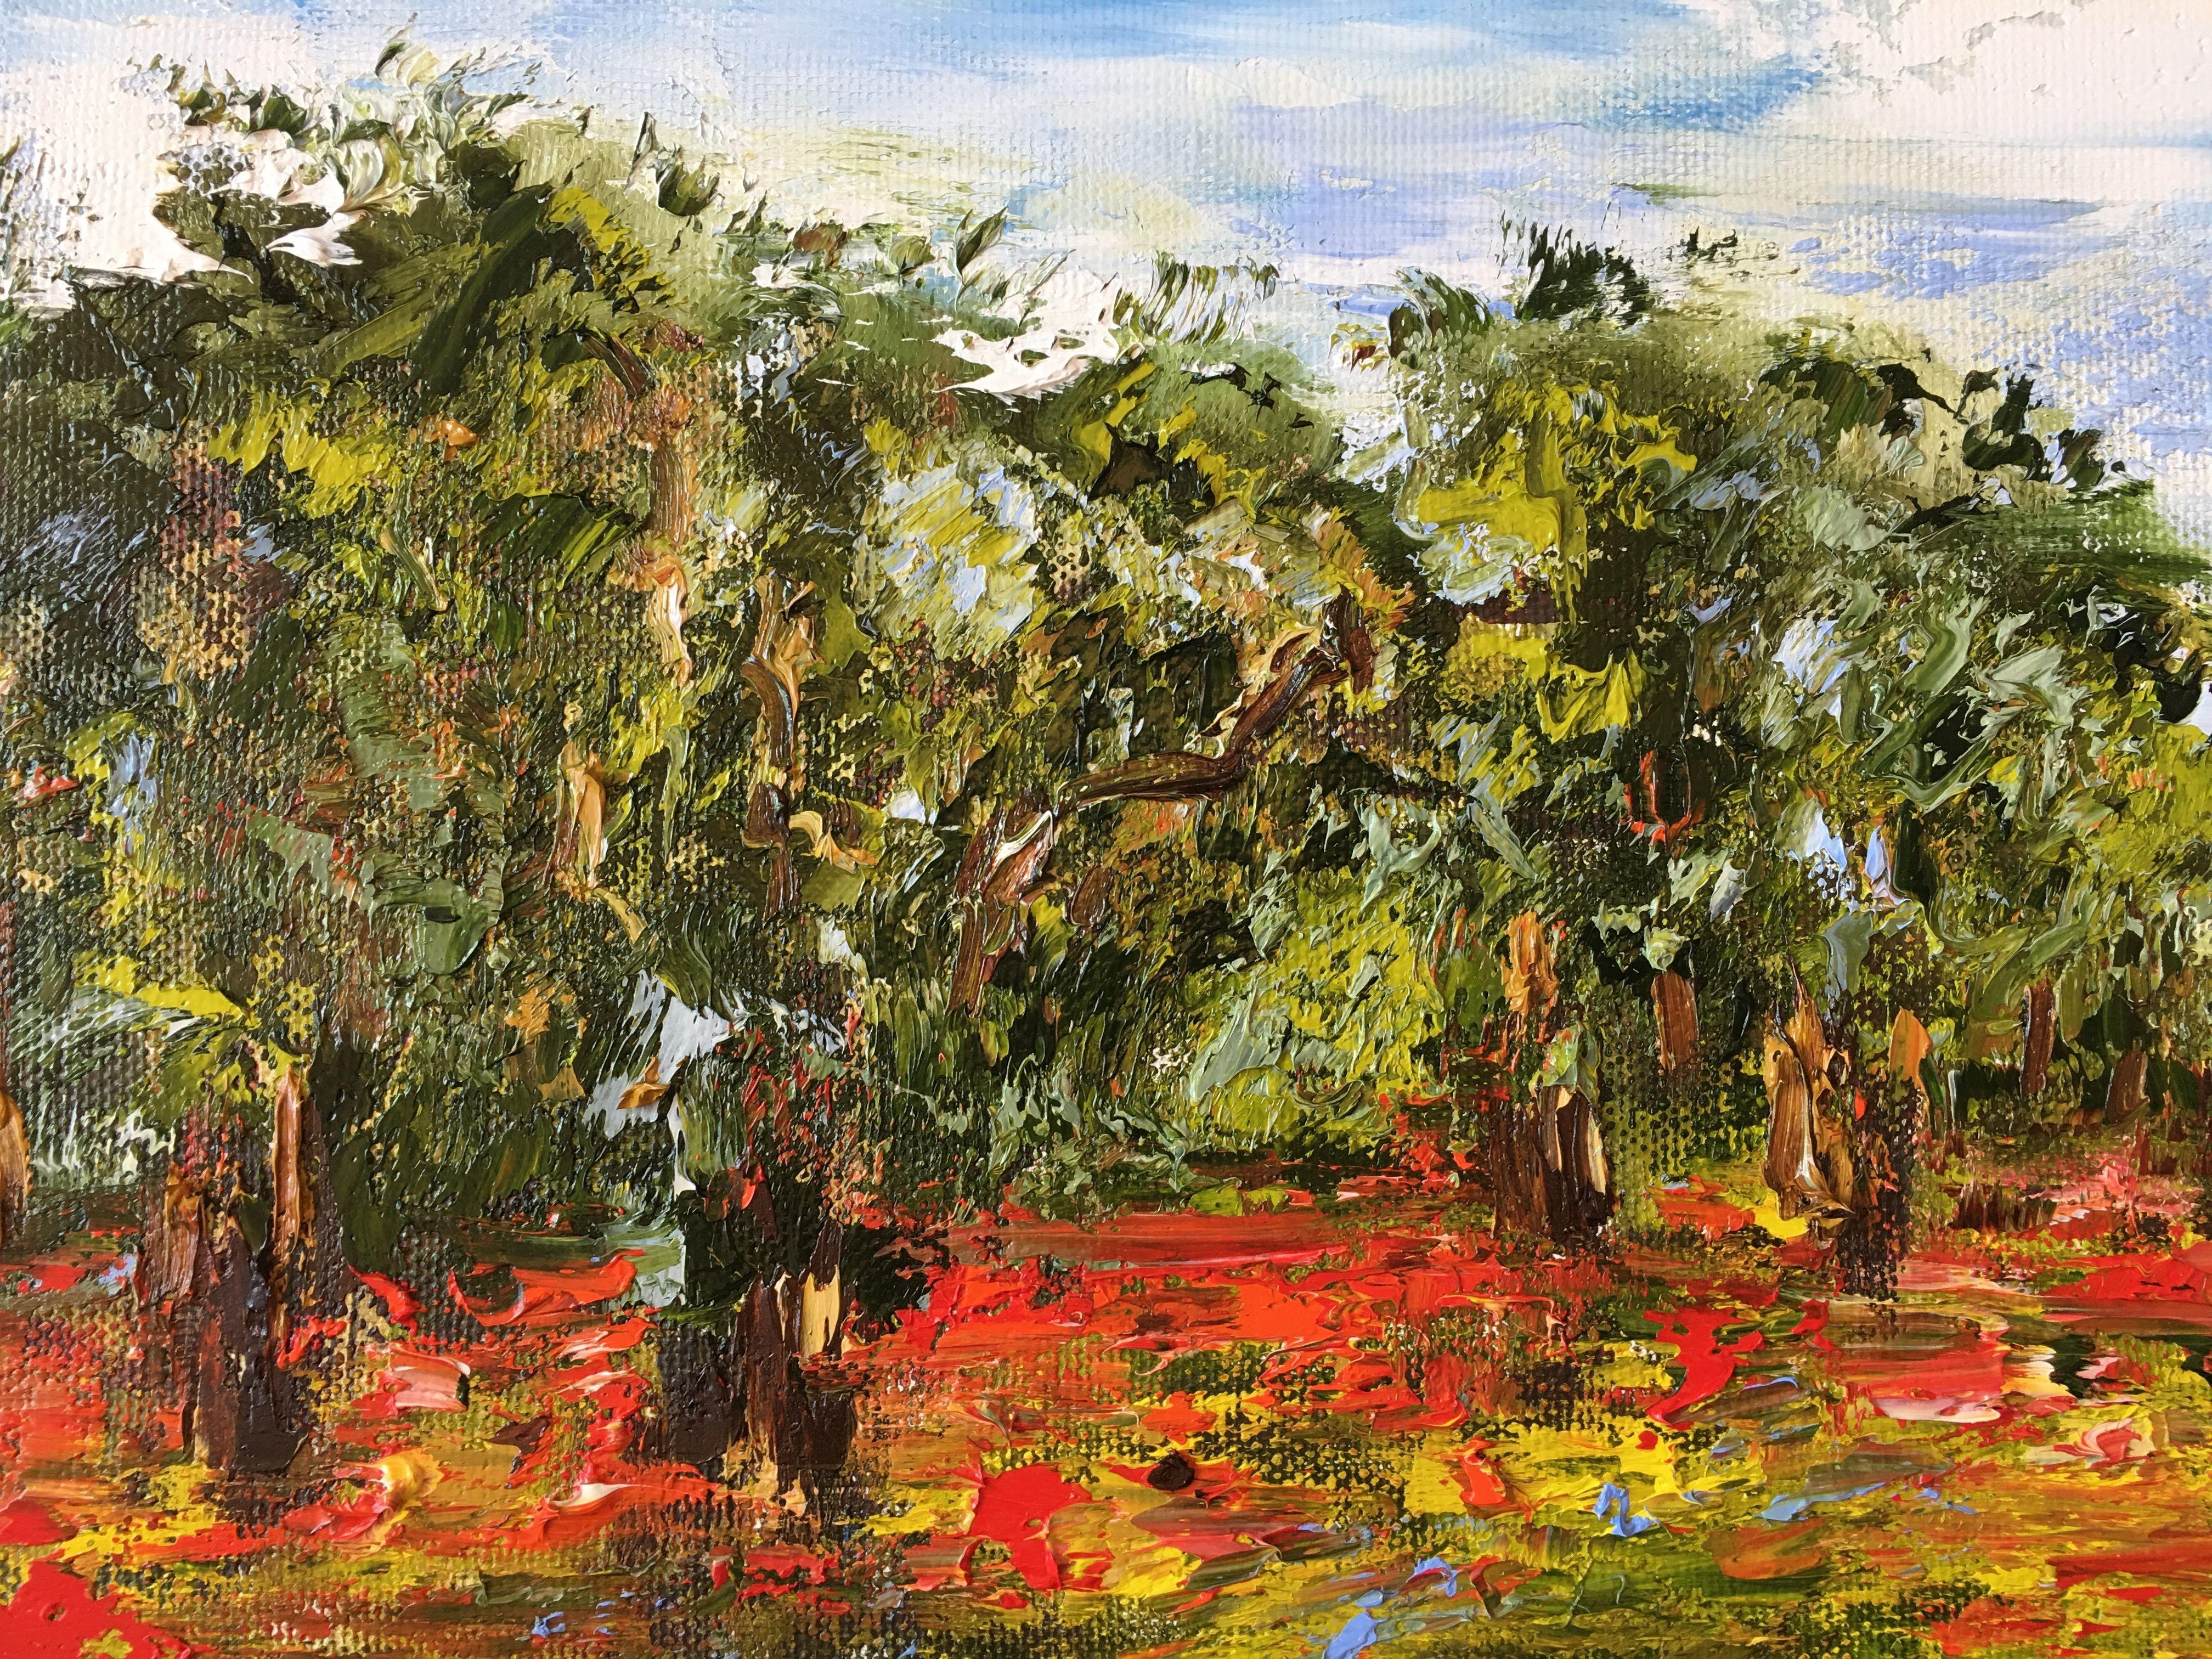 Oliviers en Provence, Painting, Oil on Canvas 2